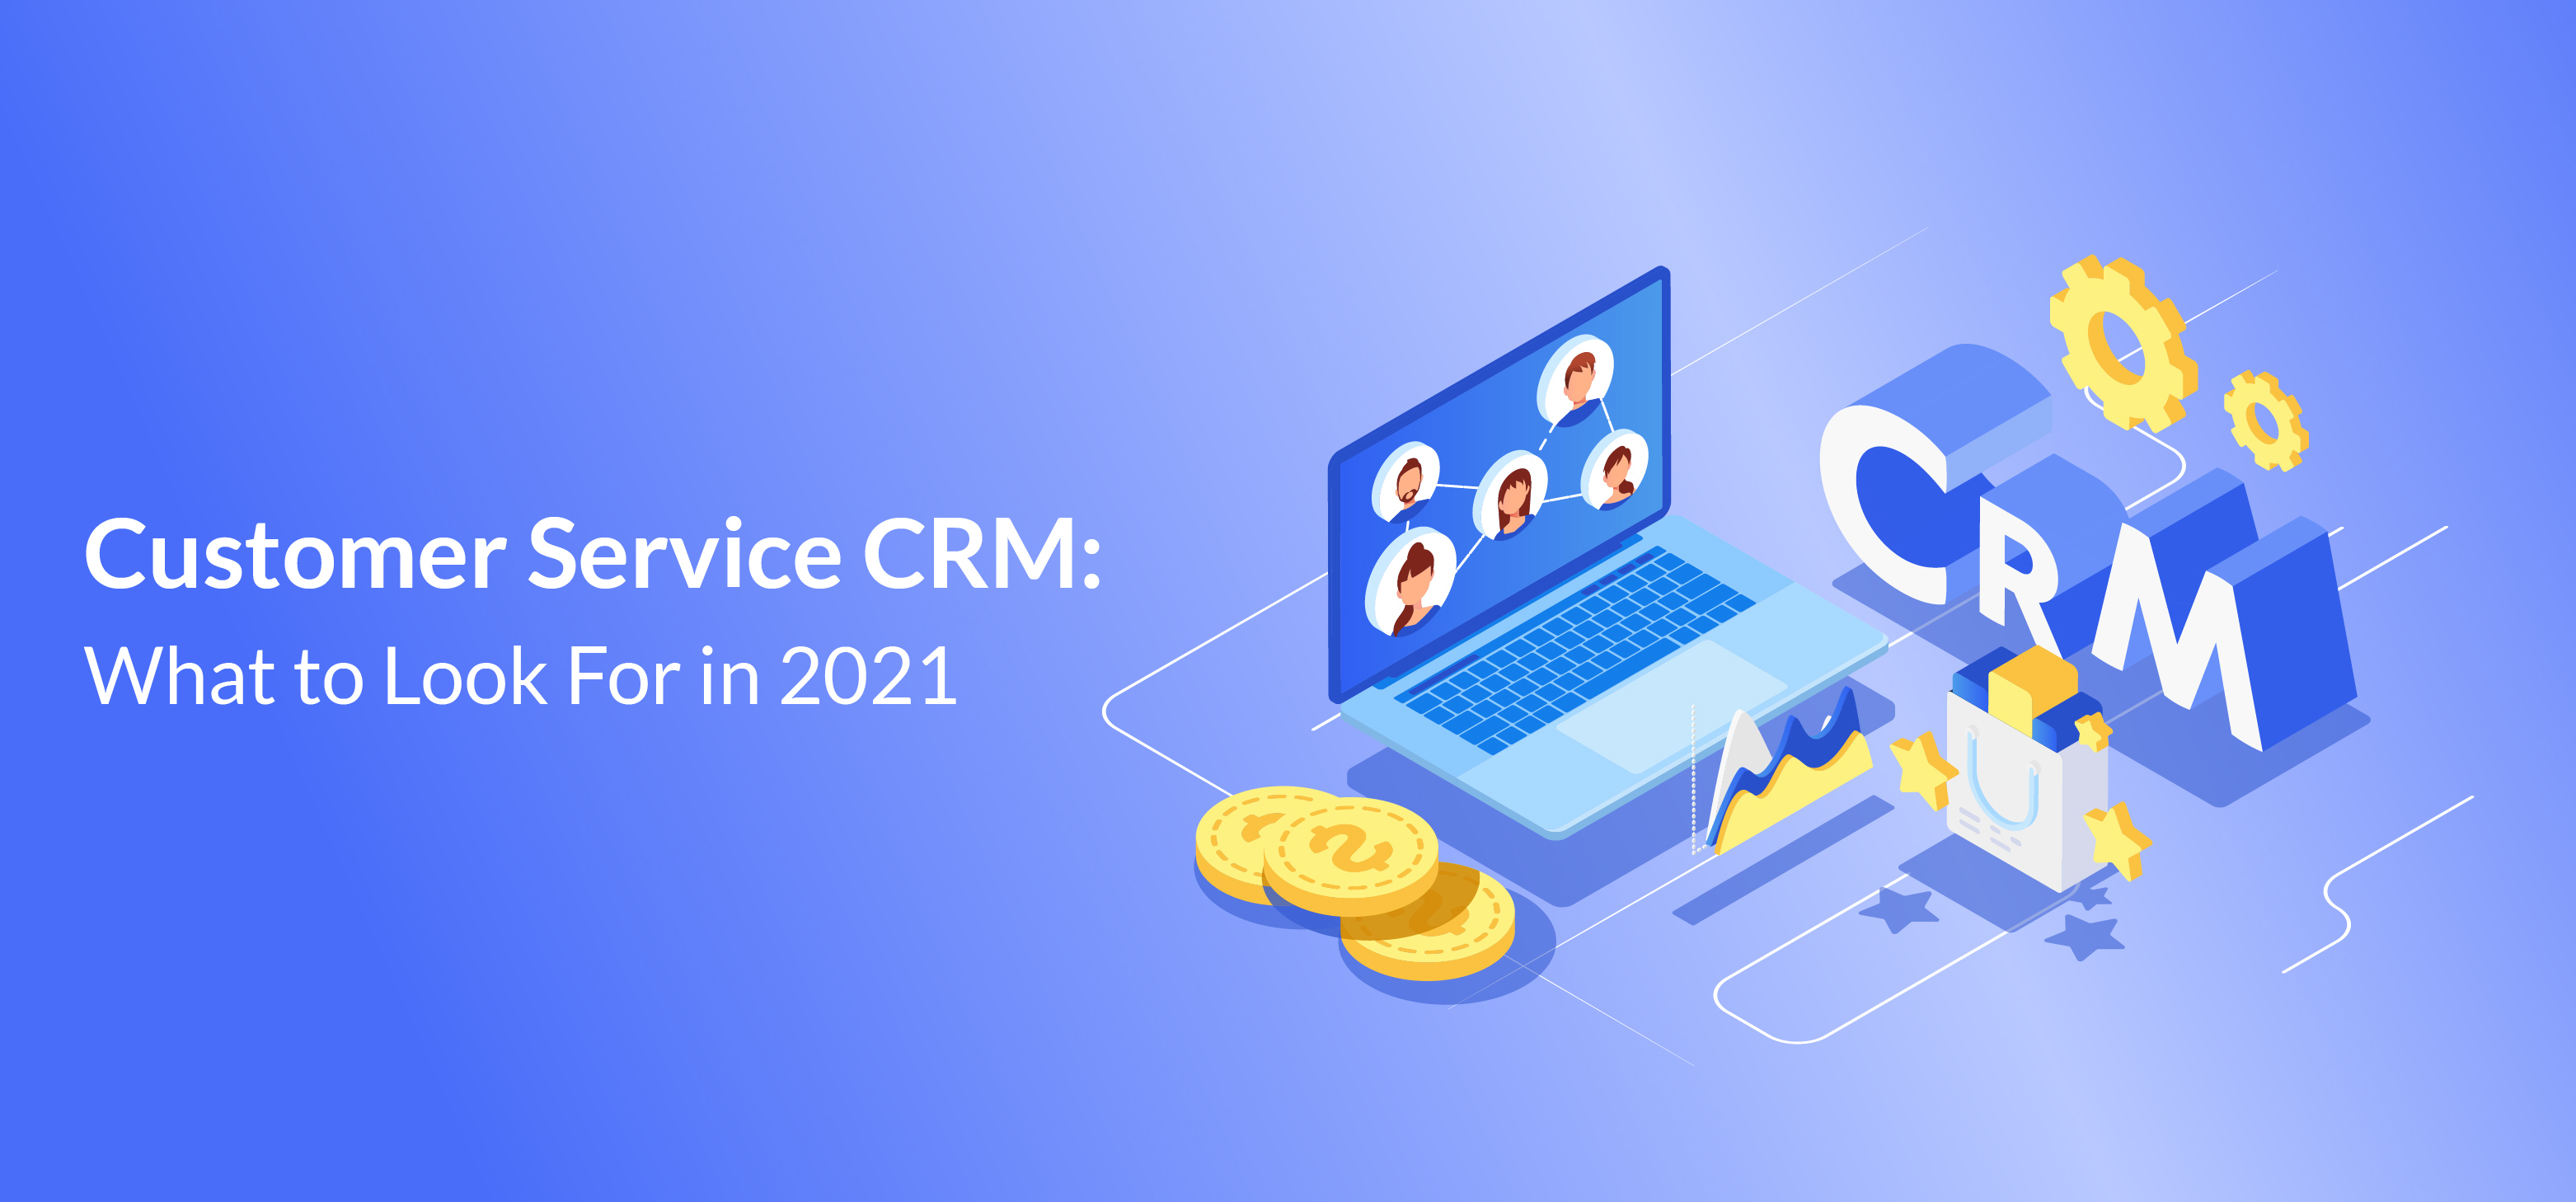 Customer Service CRM: What to Look For in 2021